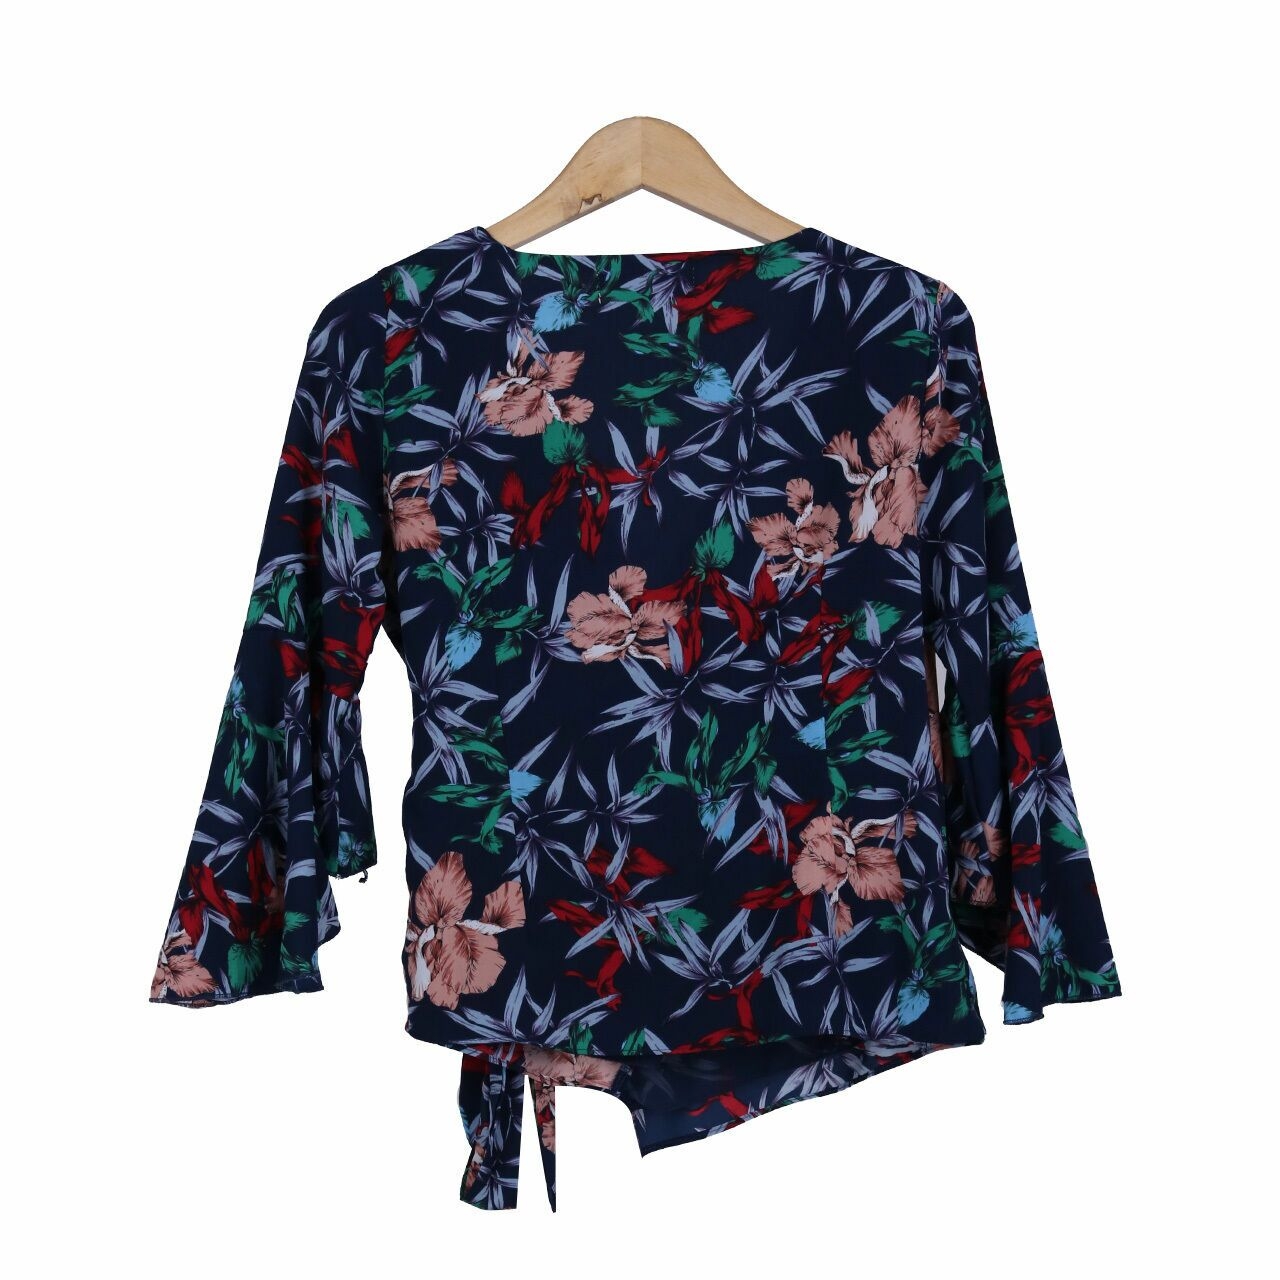 Eloise To Wear Navy Floral Wrap